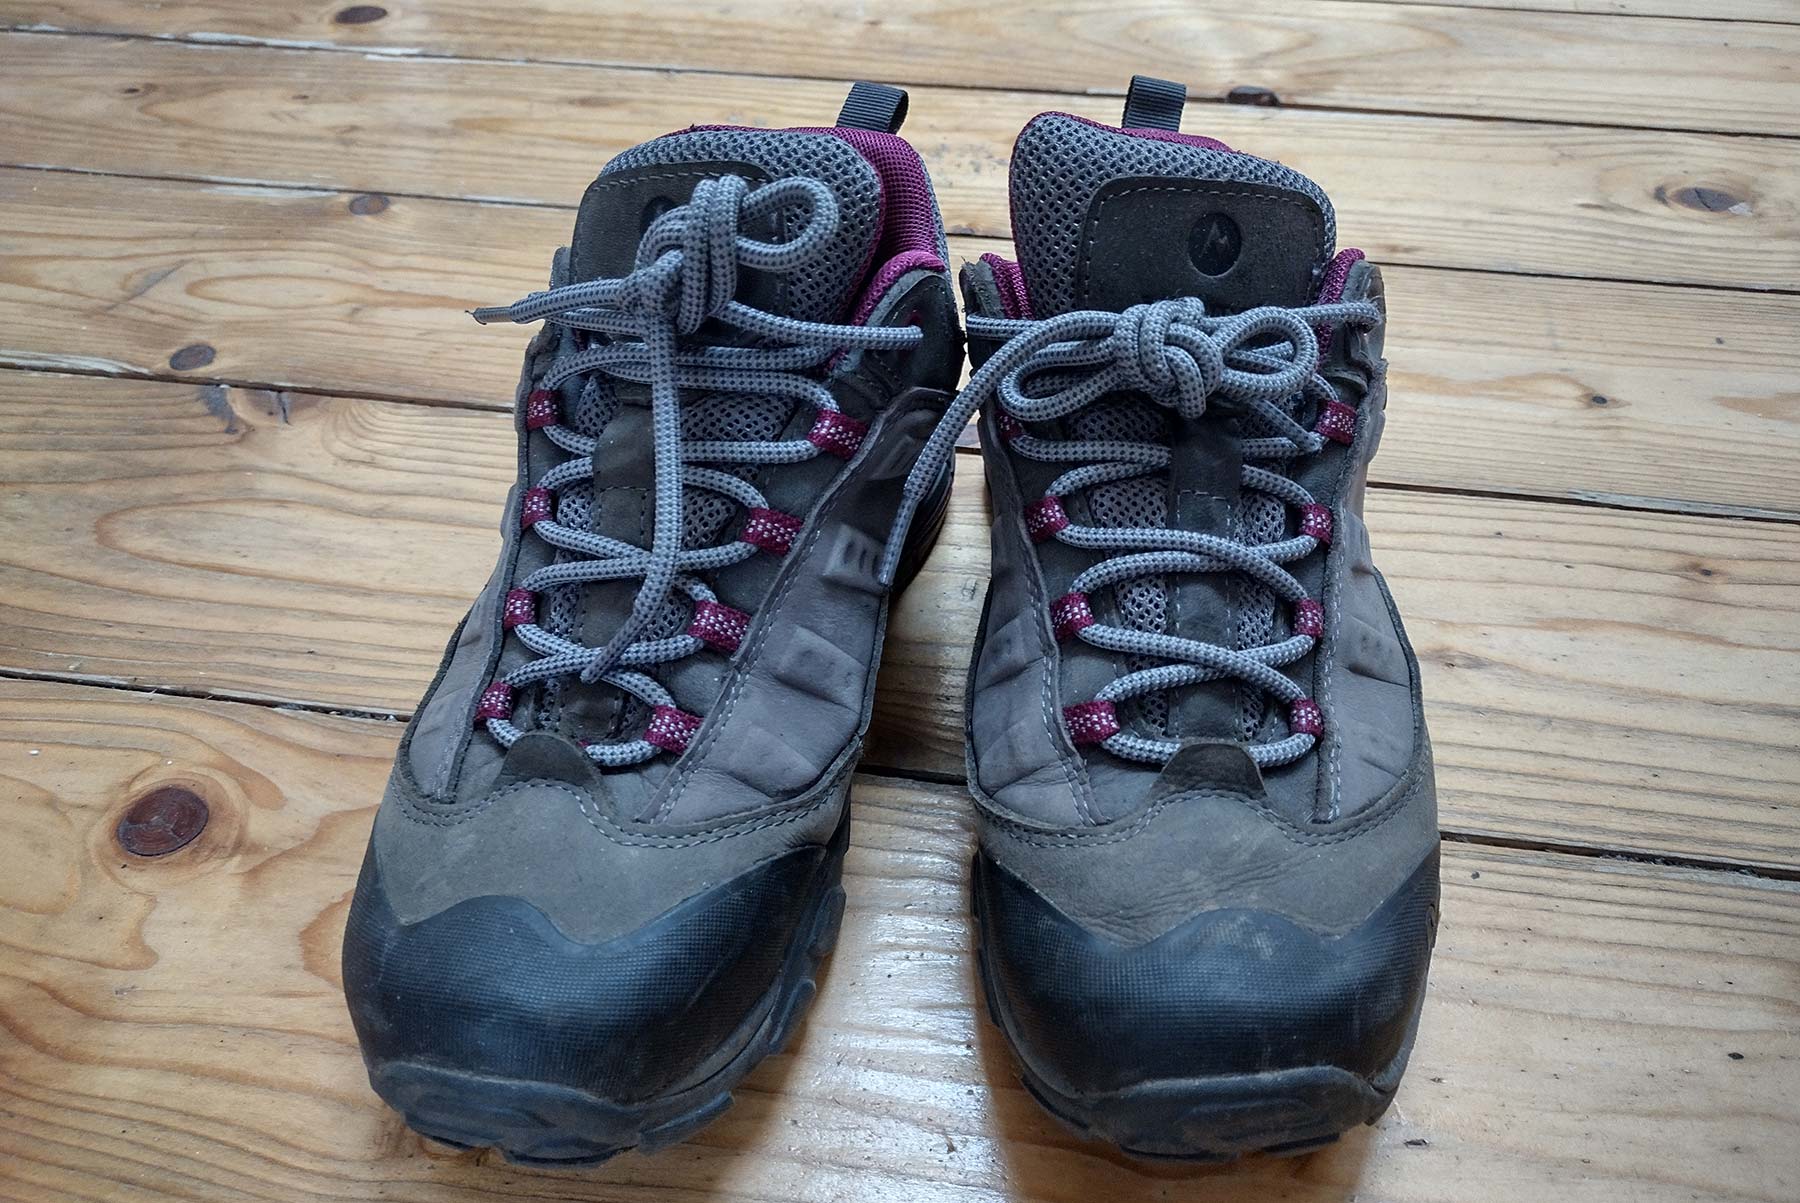 How to Choose Hiking Shoes and Boots - TripRug